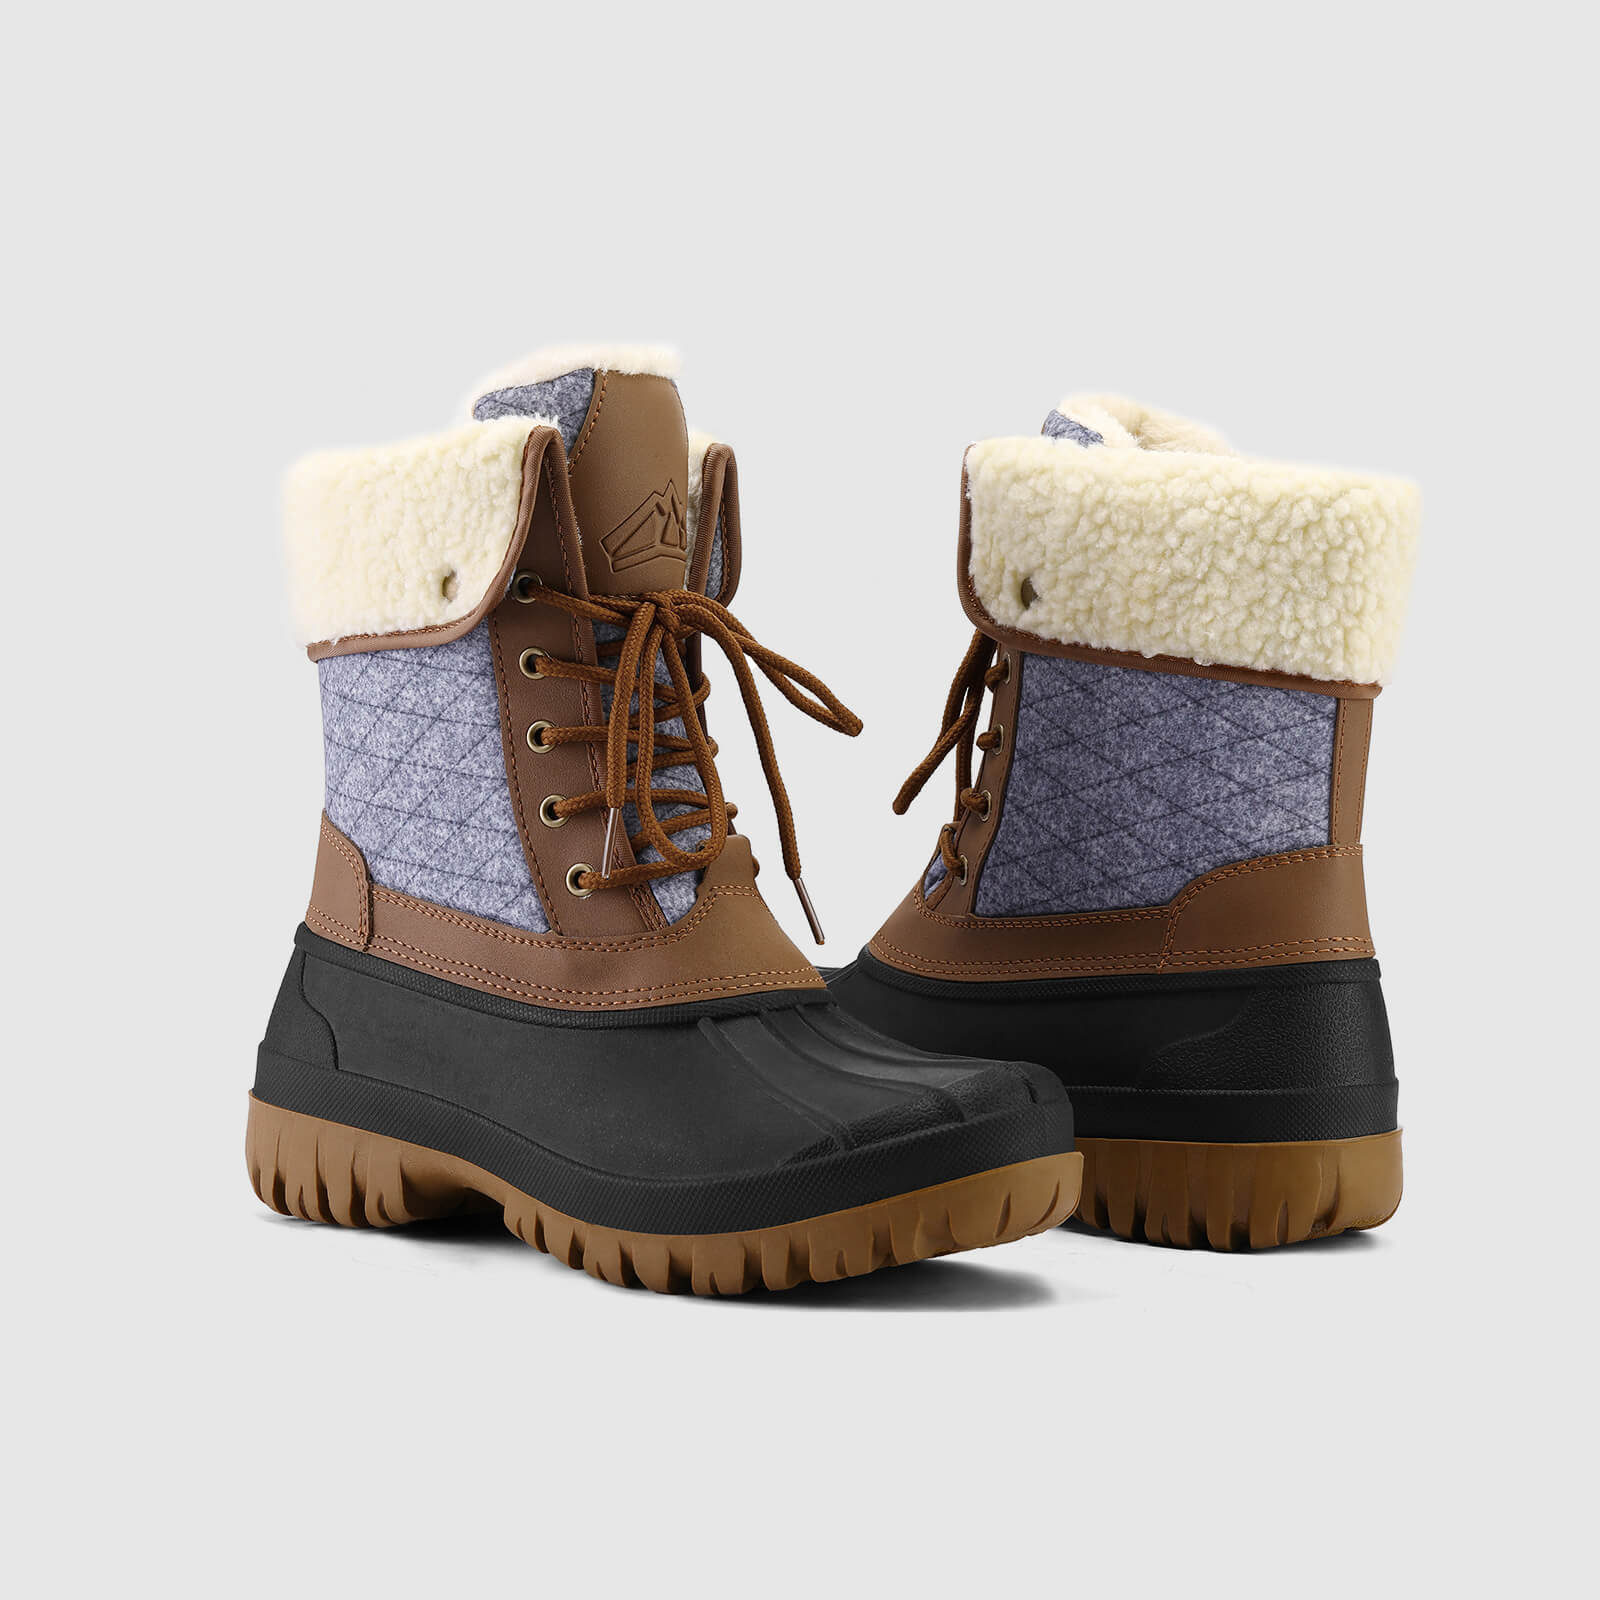 Lace-Up Winter Mid Calf Duck Boots for Outdoor